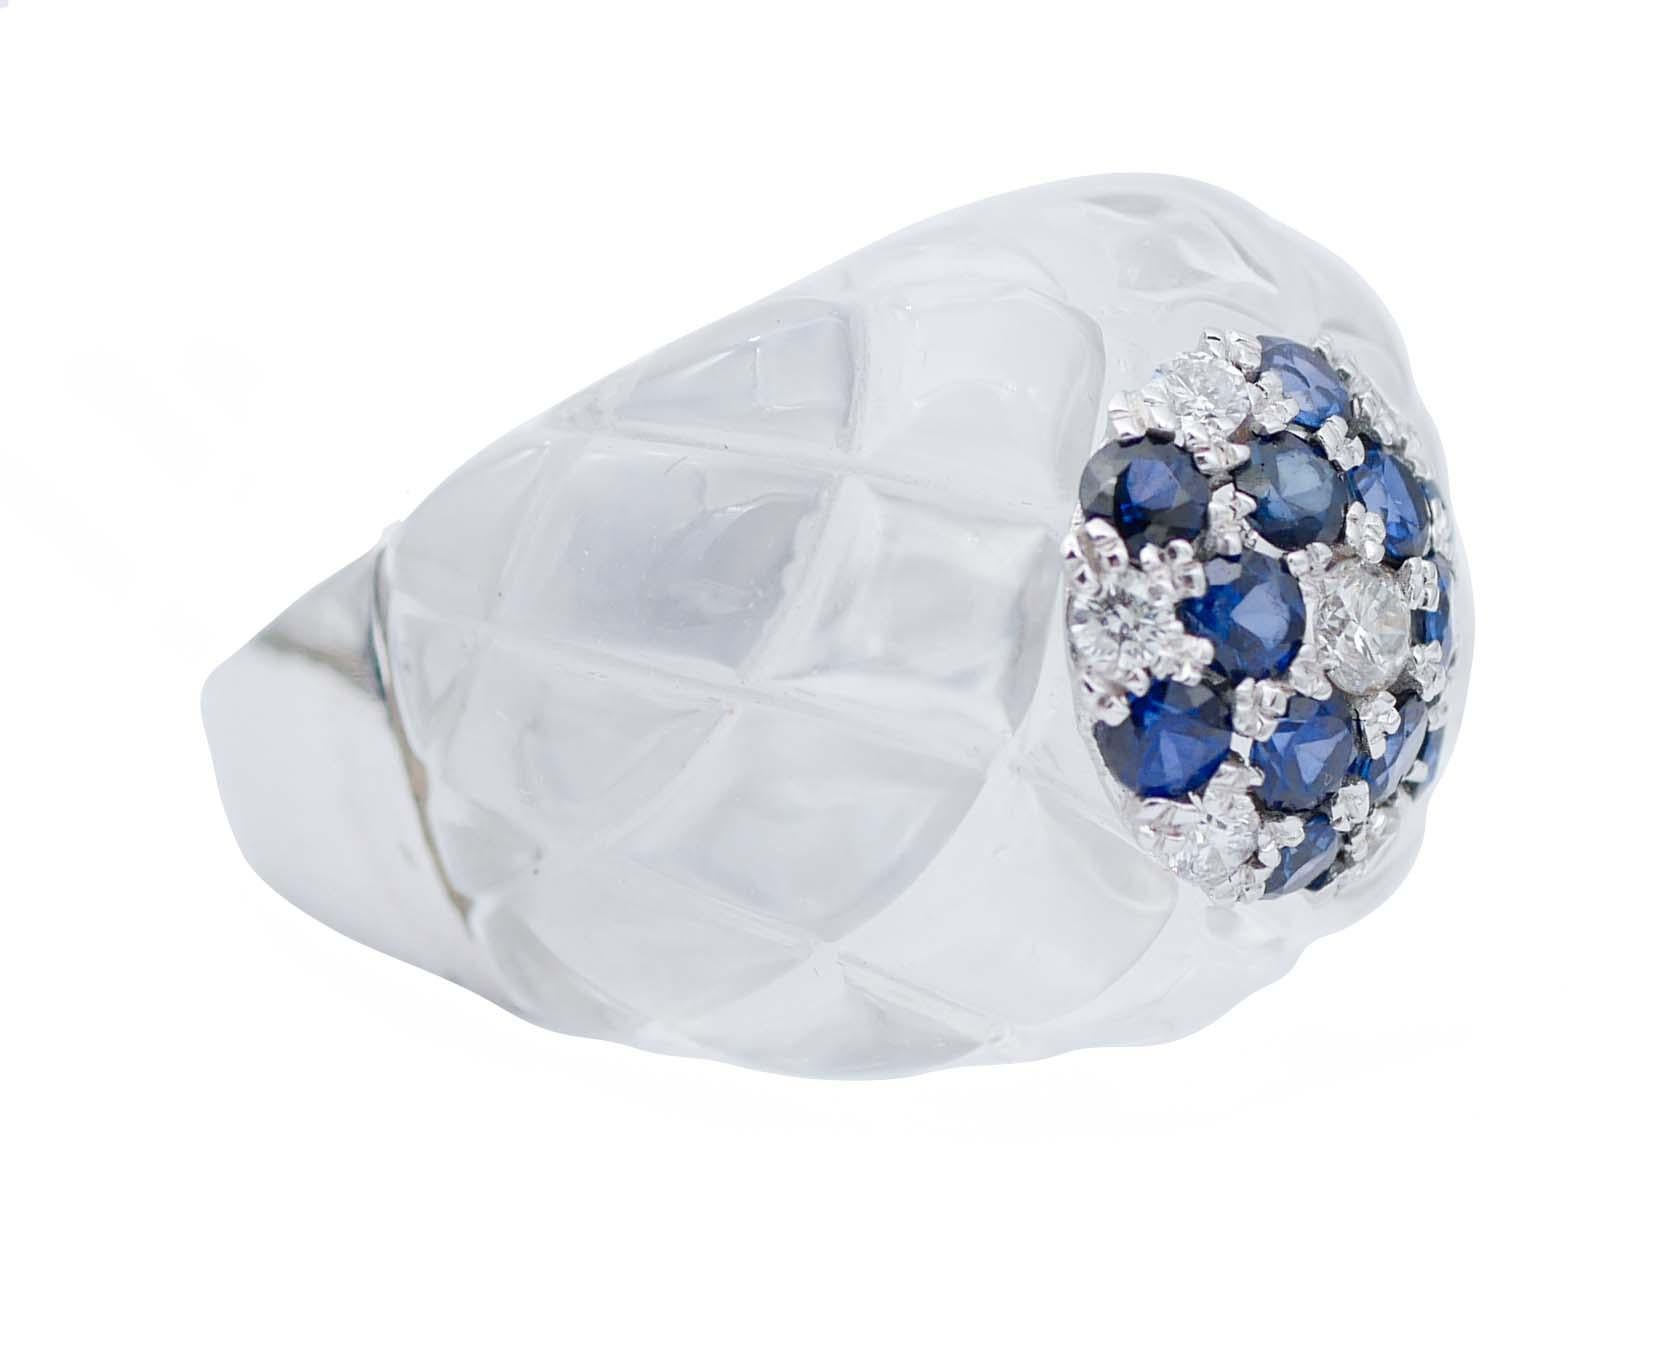 SHIPPING POLICY: 
No additional costs will be added to this order. 
Shipping costs will be totally covered by the seller (customs duties included).

Amazing ring in 14 kt white gold structure mounted with a rock crystal and, in its center, a gold